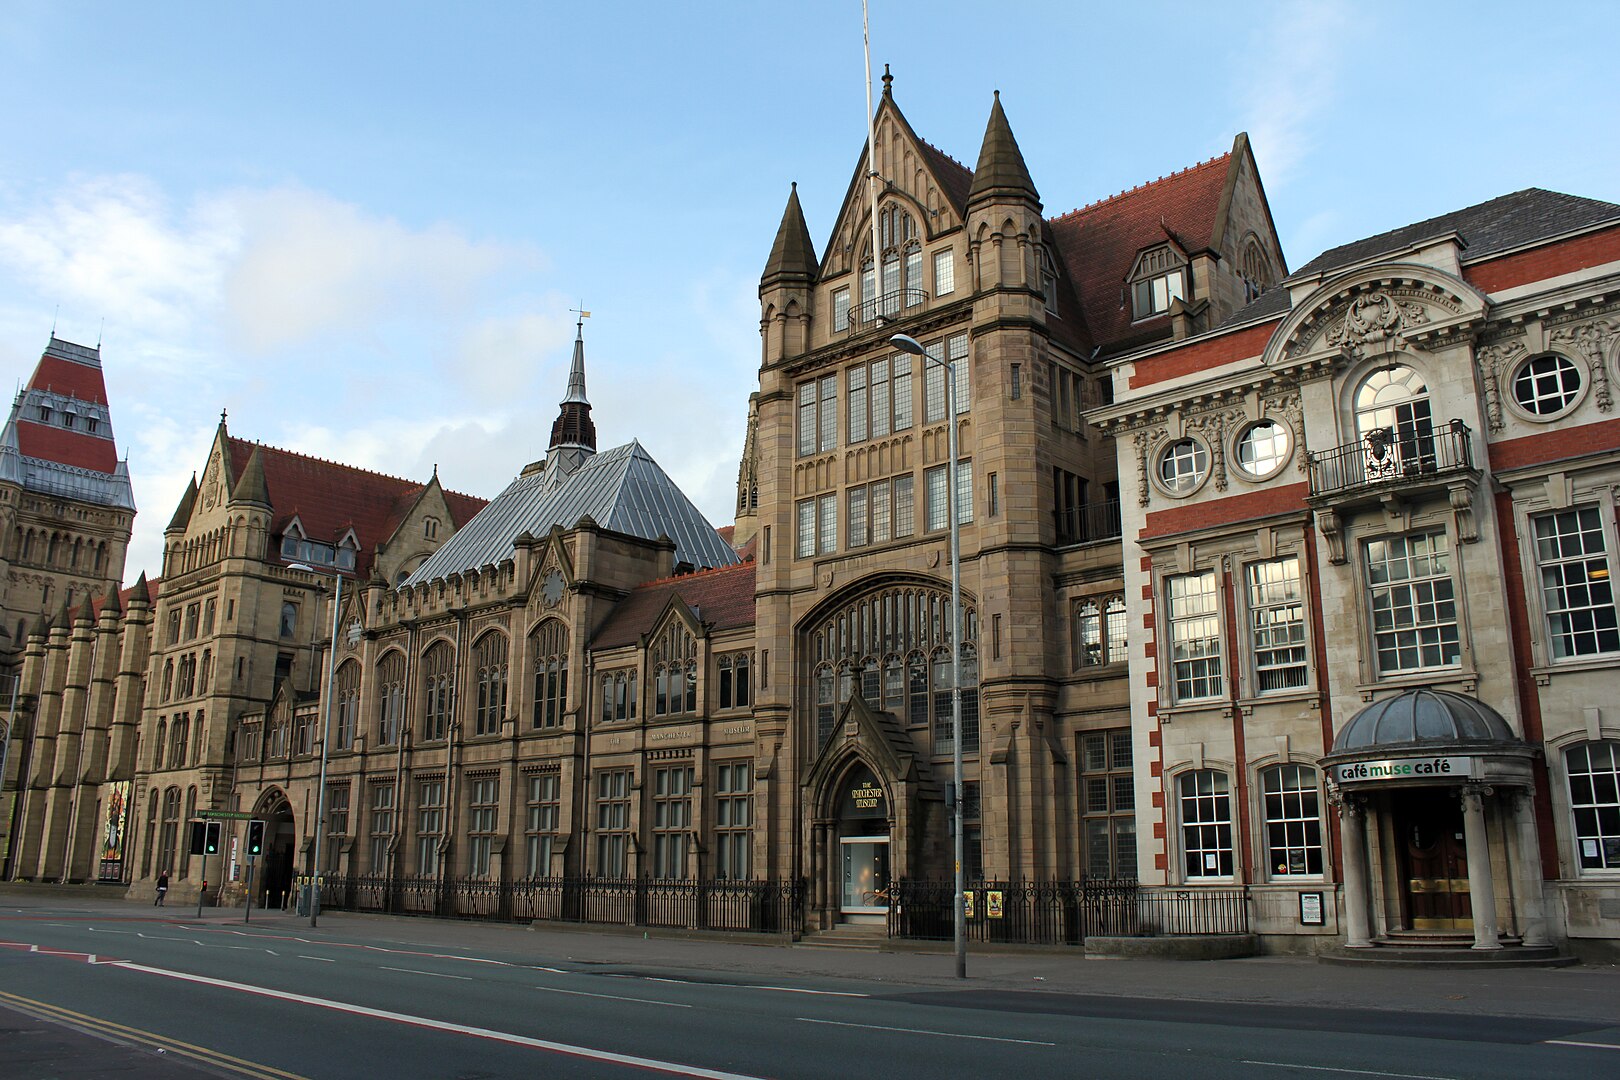 The exterior facade of Manchester museum. The entrance to the museum cafe is shown and the sky is blue with a few white clouds